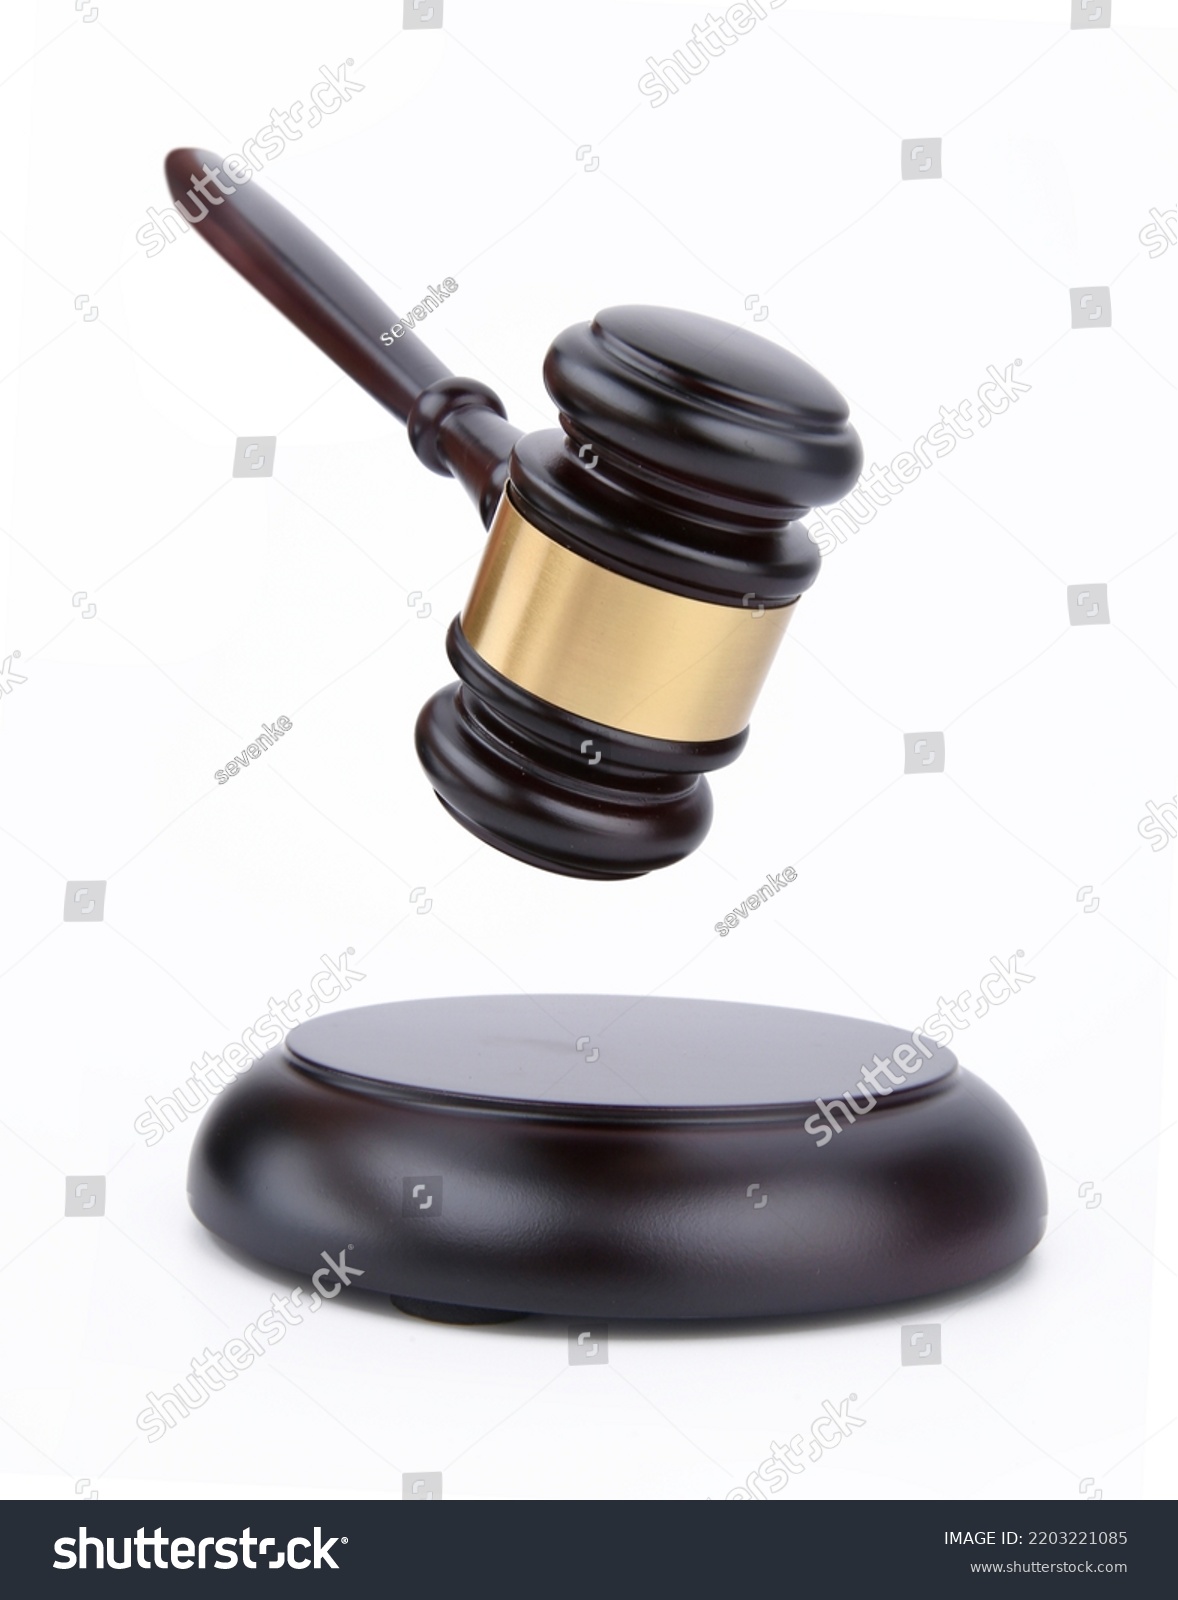 Wooden judge gavel and soundboard isolated on a white background. Justice of law system conceptual. #2203221085